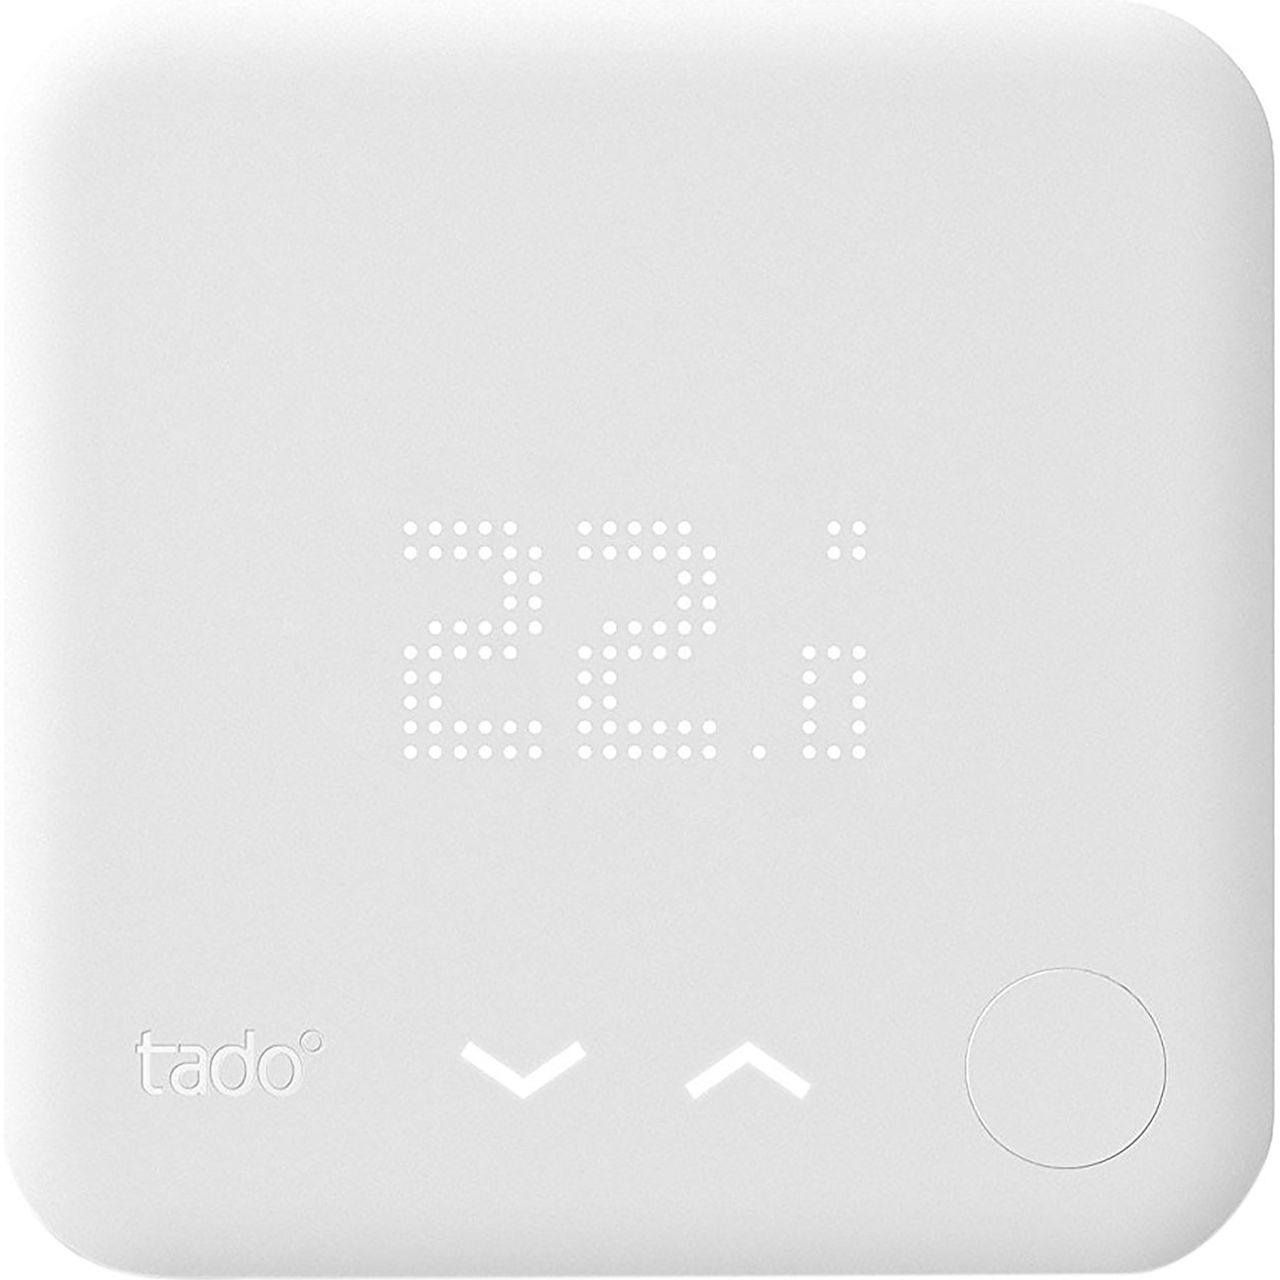 tado Additional Smart Thermostat Review